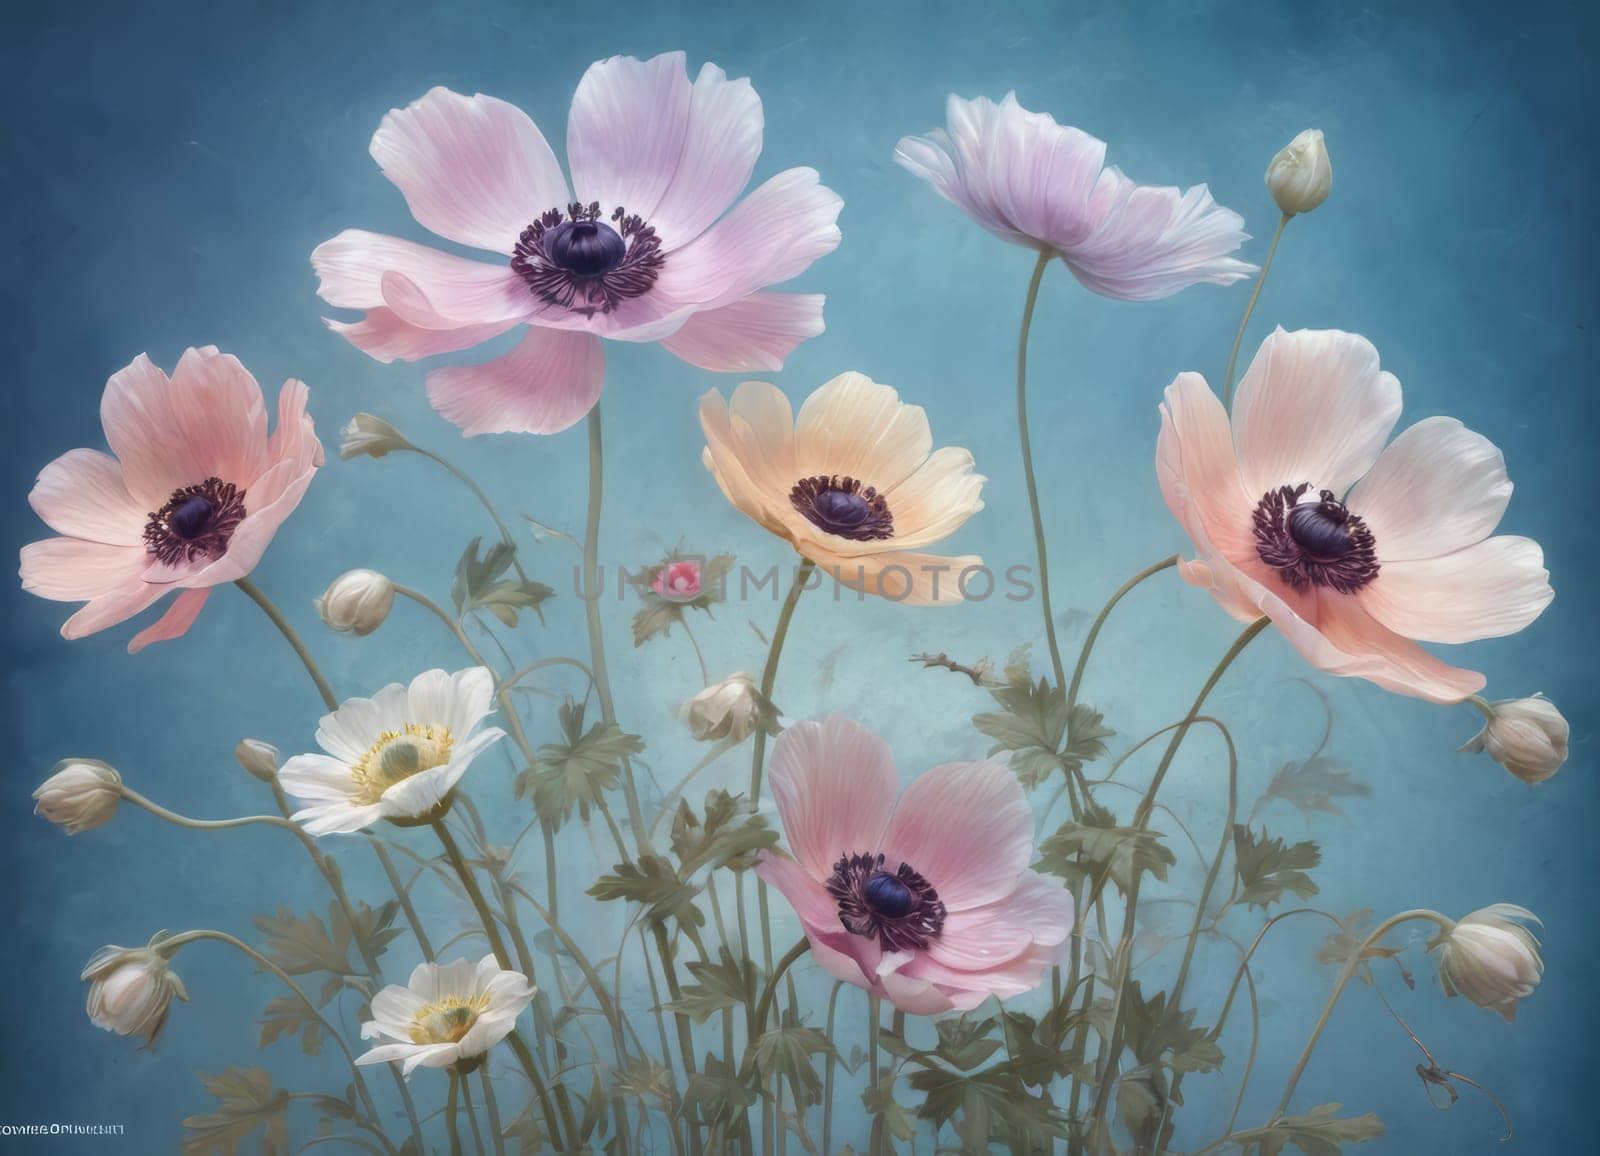 Delicate drawing of blooming poppies on a blue background by Andre1ns